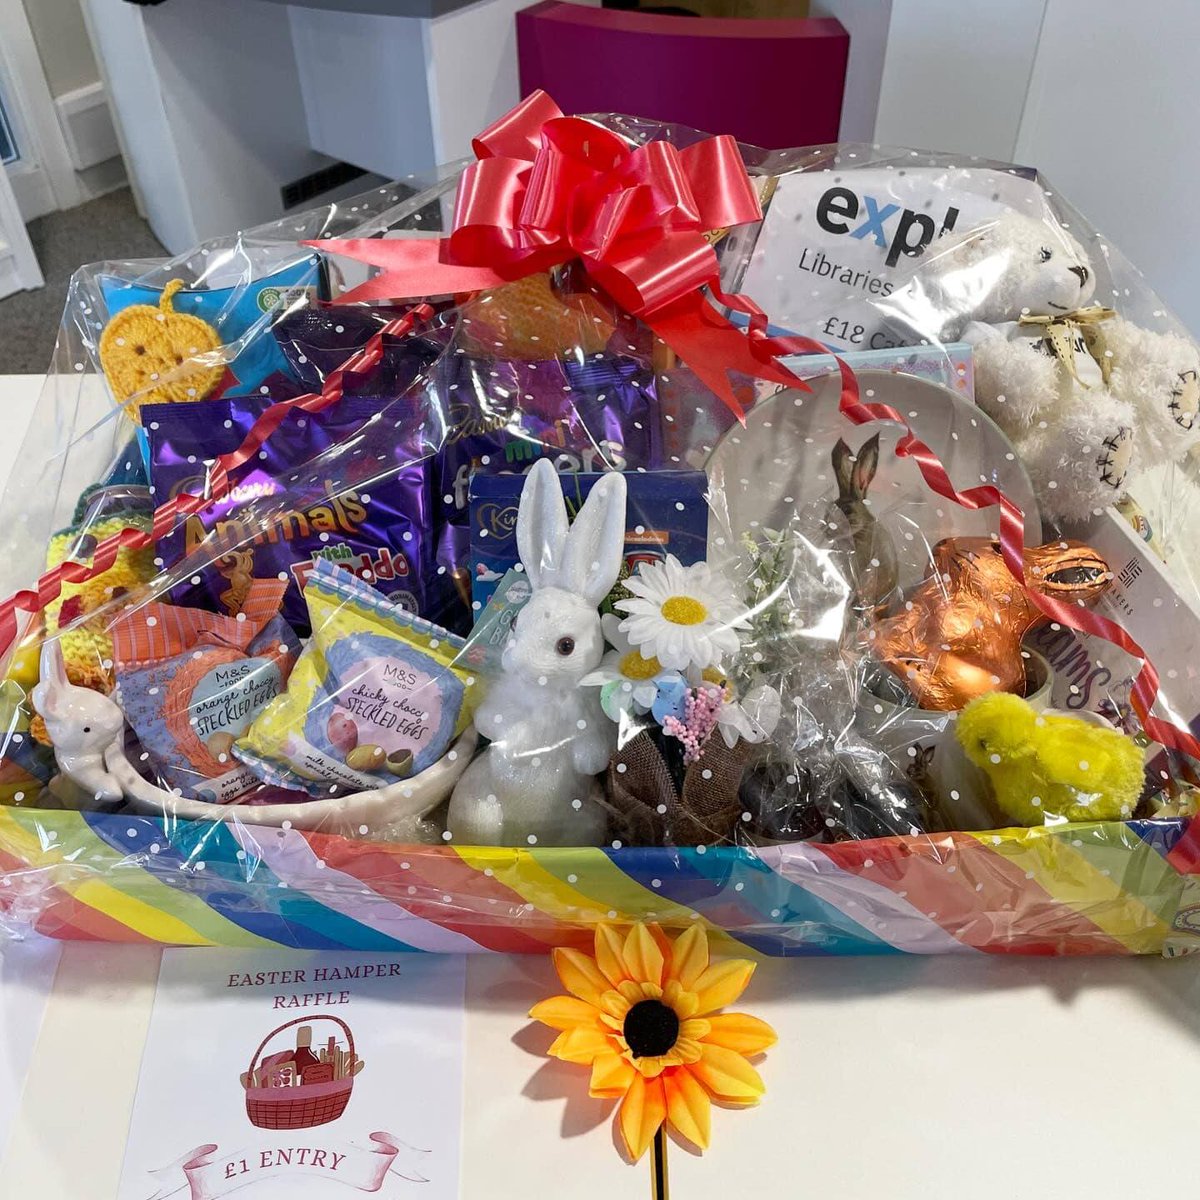 A big thank you to everyone who entered the Easter Bonnet competitions and who bought raffle tickets. The winners have been contacted. Finally a big thank you to our wonderful crafting Group for their generosity and contributions. #tanghall #supportexplore #ExploreTogether